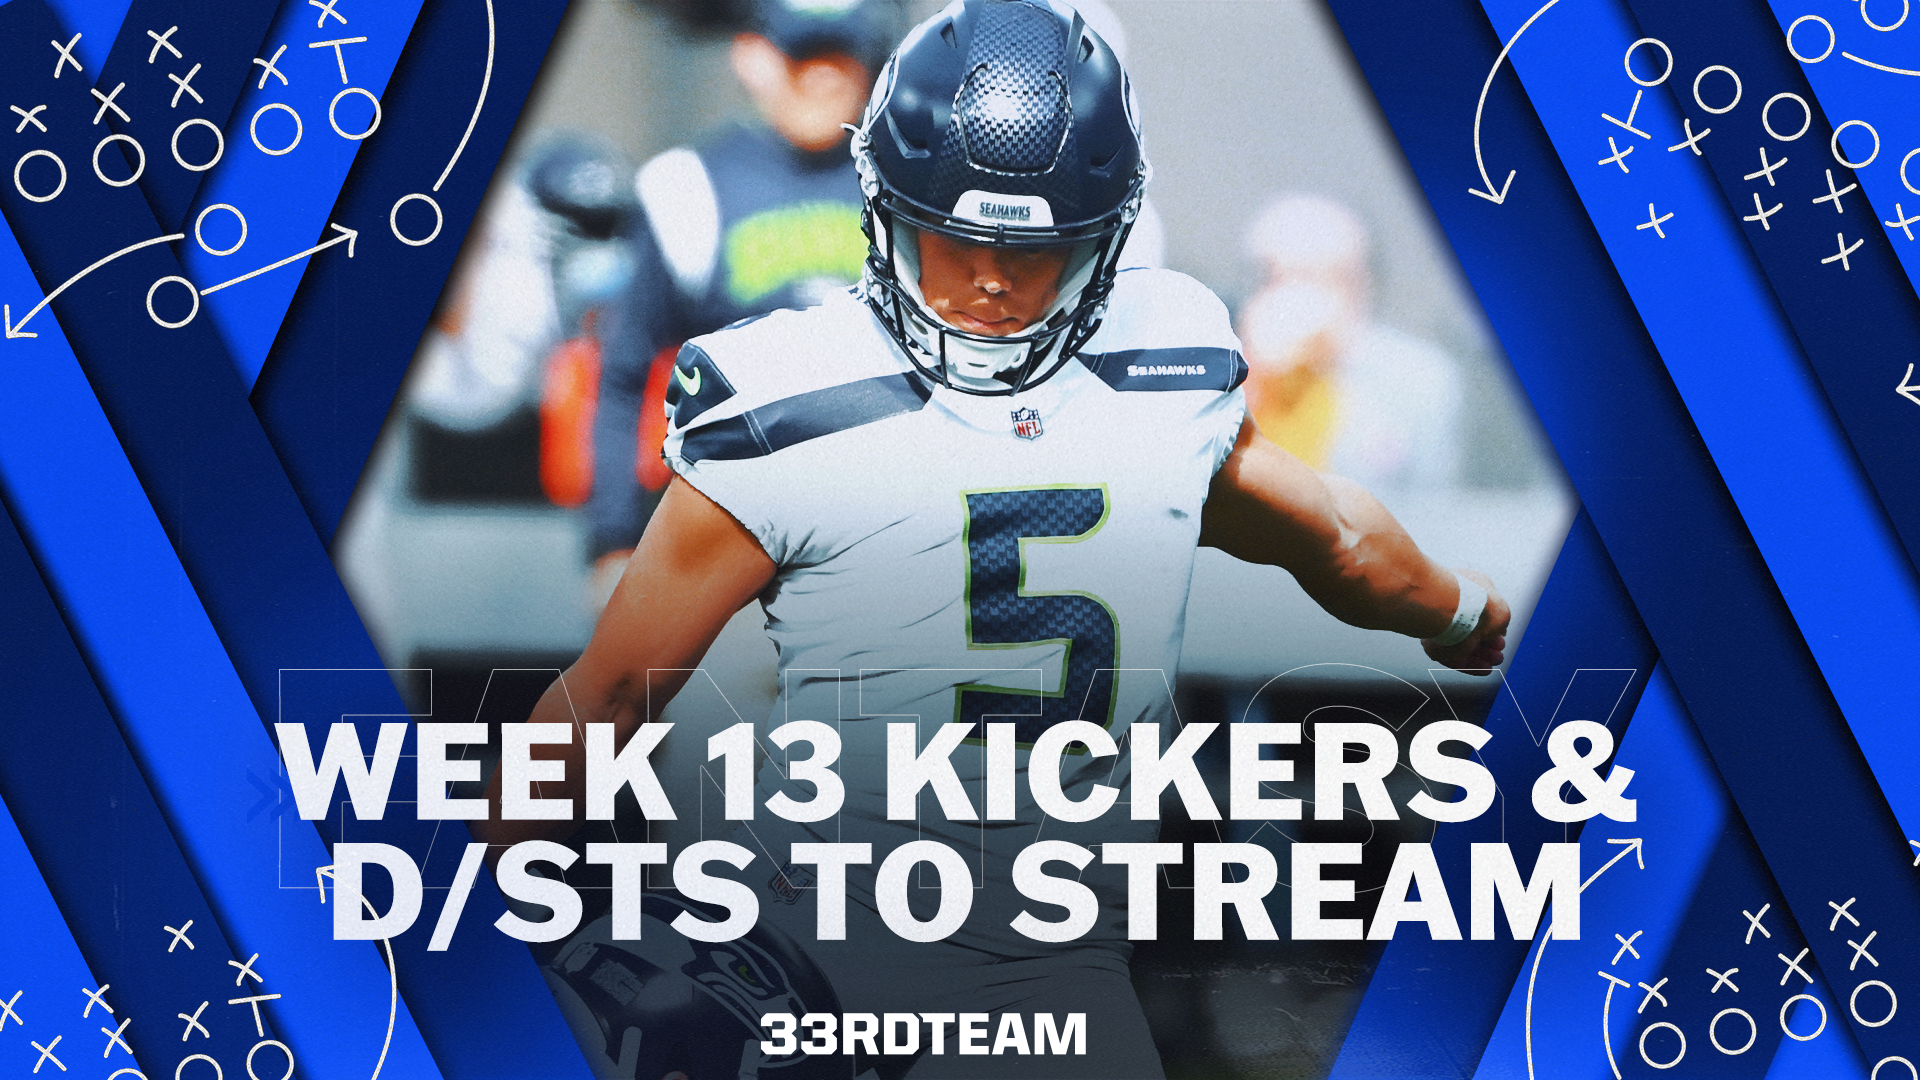 Kickers and D/STs to Stream for Fantasy Football Week 13